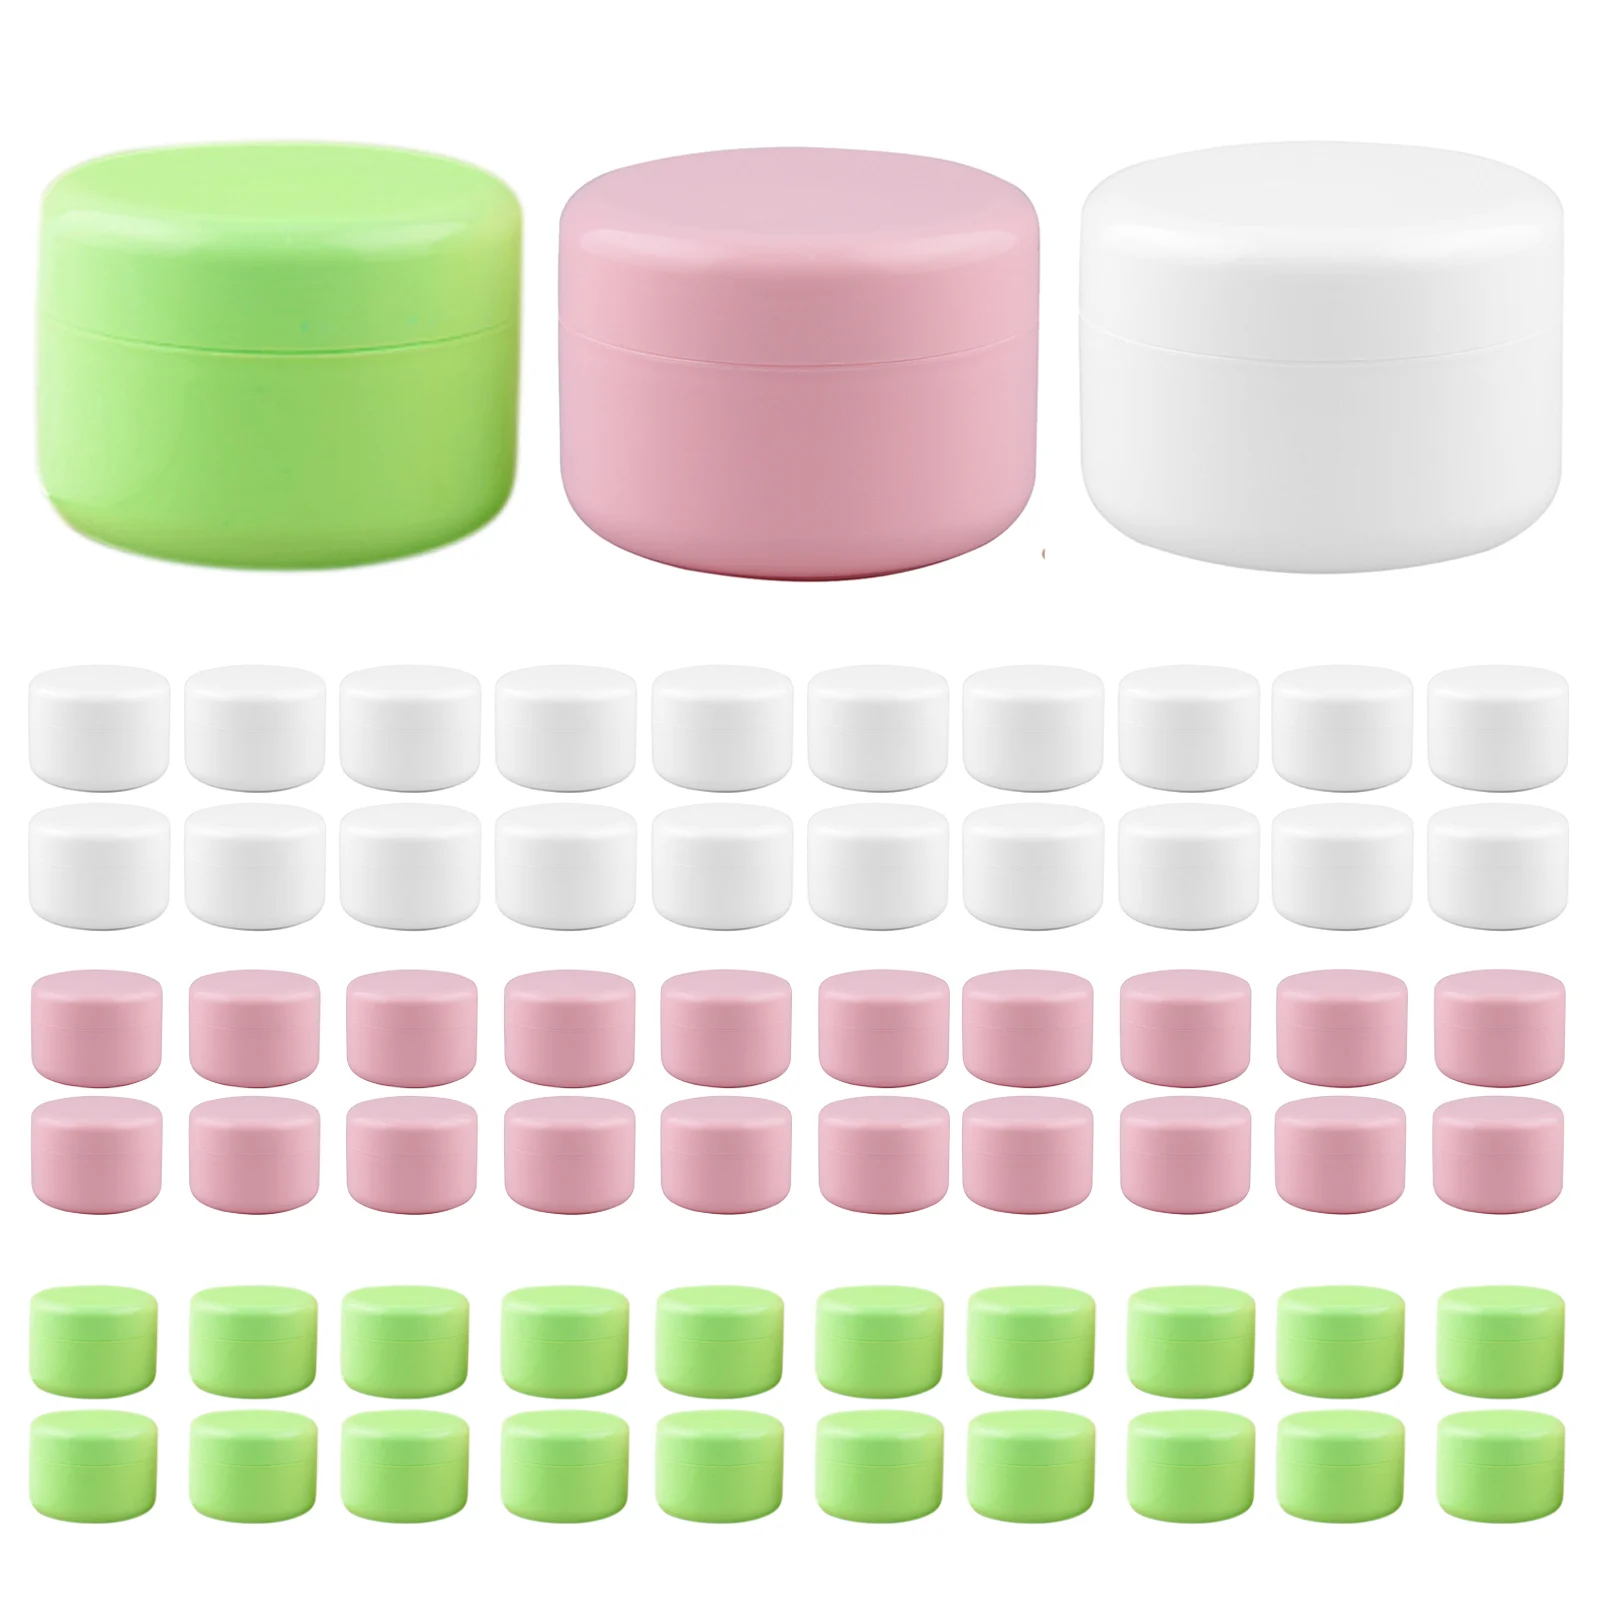 20PCS Cosmetic Containers 20g Plastic Empty Creams Lotions Toners Lip Gloss Storage Jar Boxes for Home Travel Business Trip